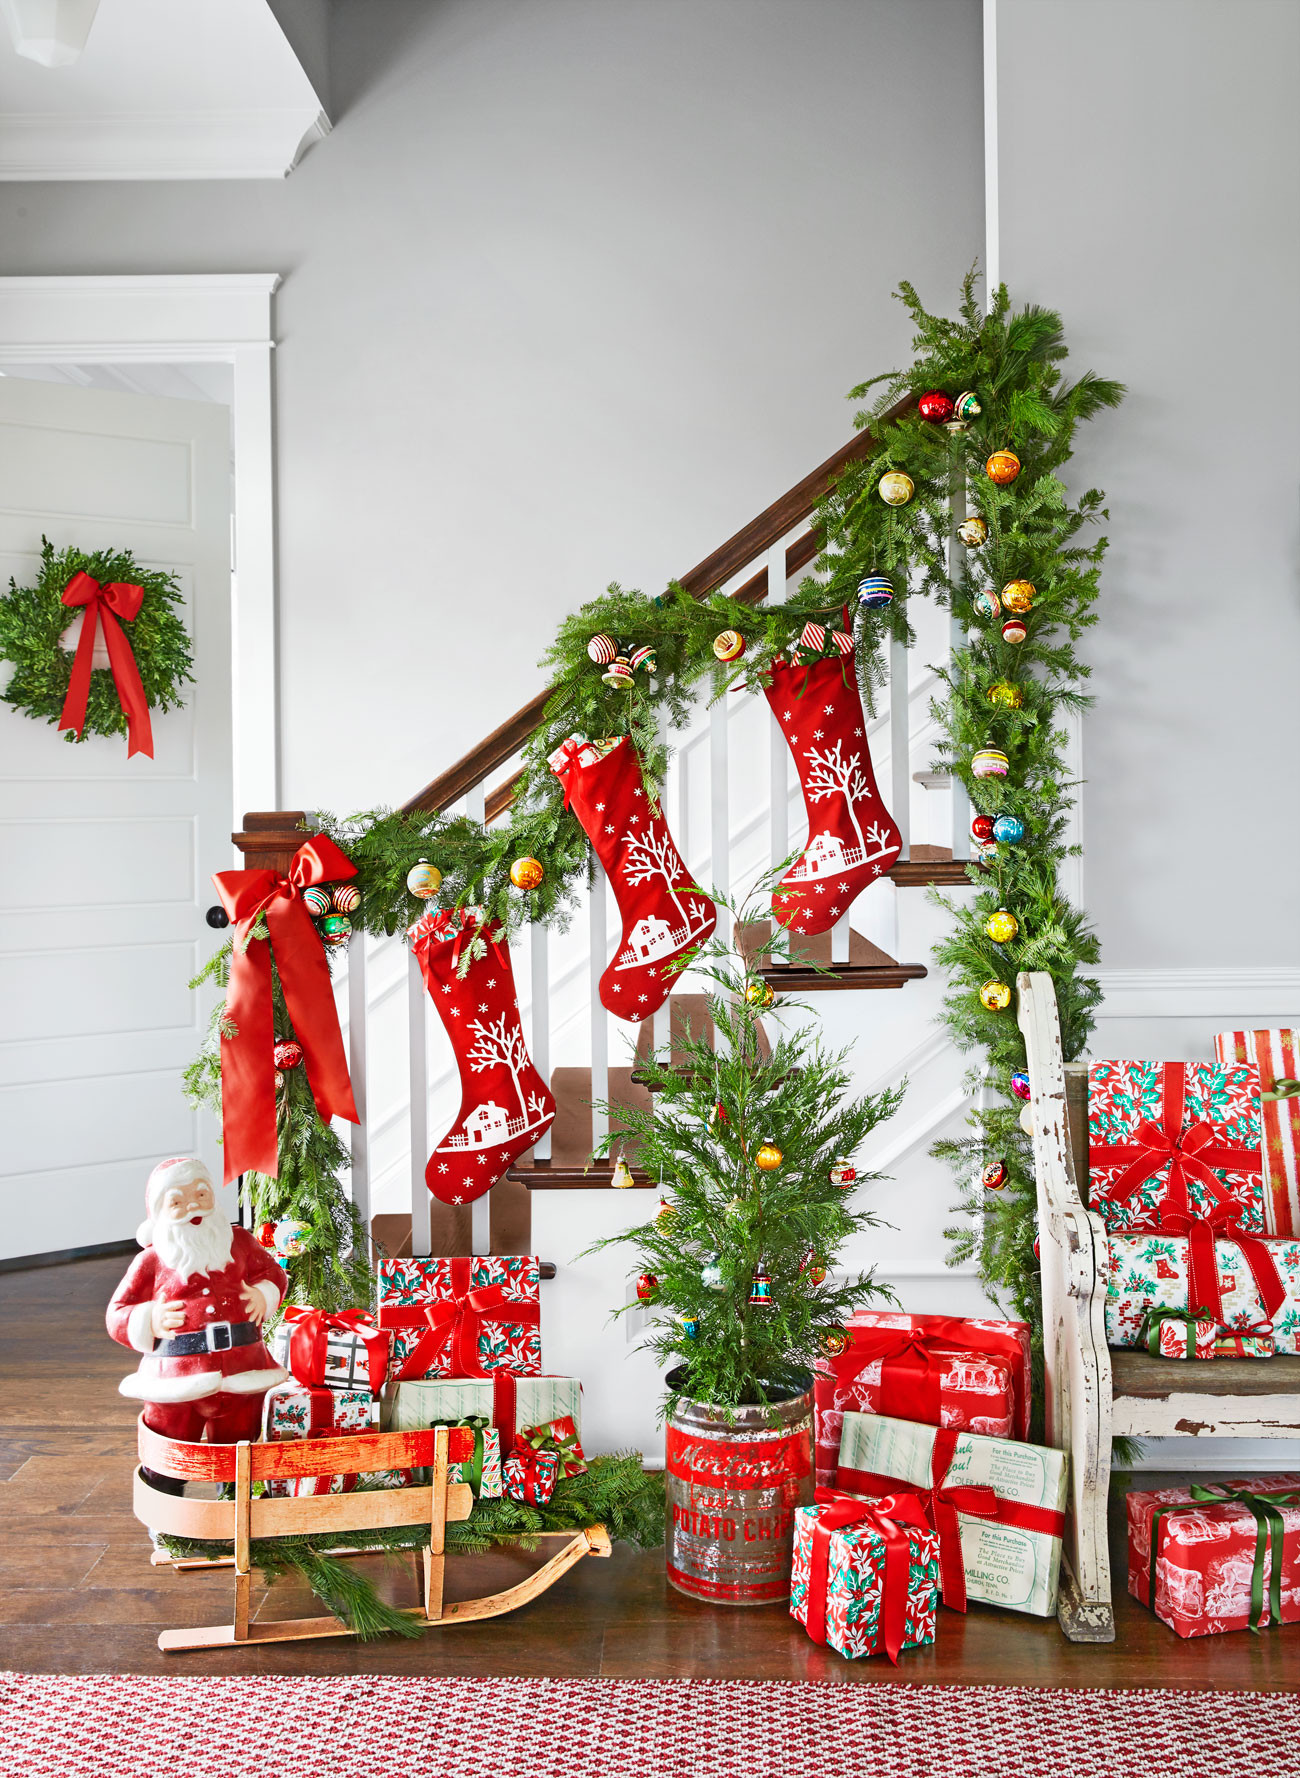 Christmas Home Decor
 100 Country Christmas Decorations Holiday Decorating